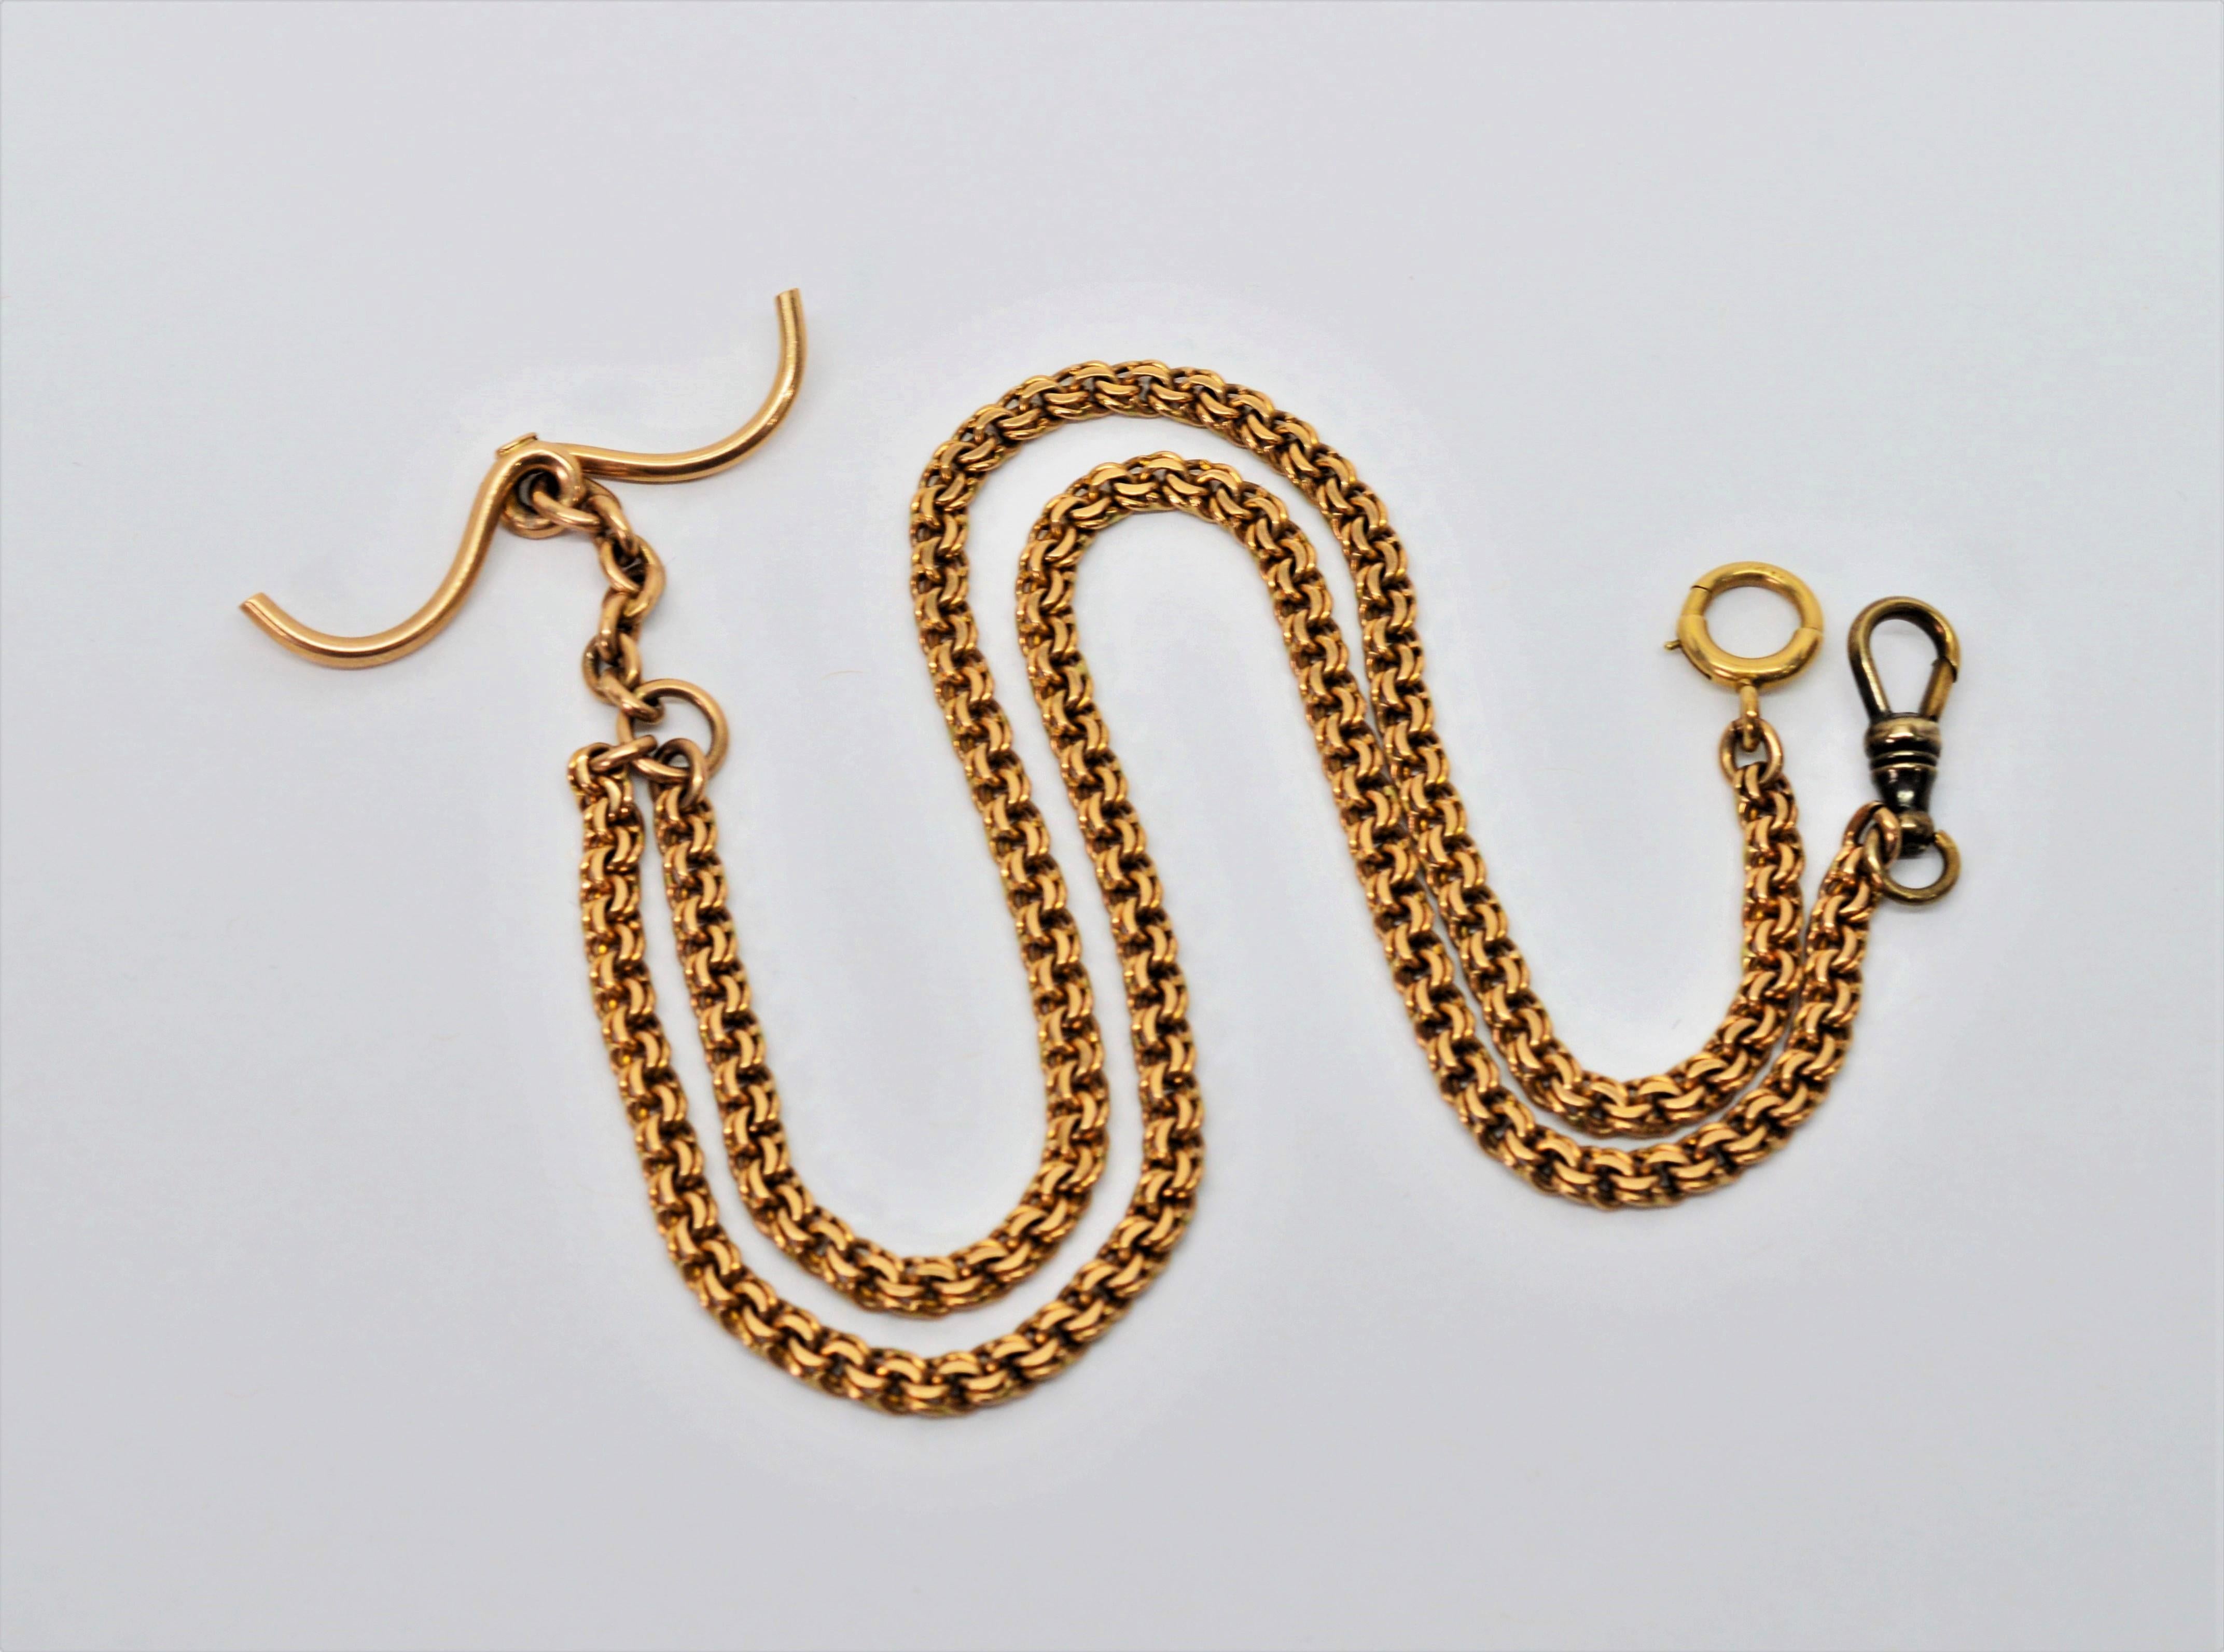 Twenty inch antique  4.16mm double link flat curb chain for pocket watch in twelve carat 12K yellow gold. In fine condition, has curved style pocket T-Bar, measuring 1-6/8 inch across. Fitted with a swivel dog clip and spring ring. Gift boxed.